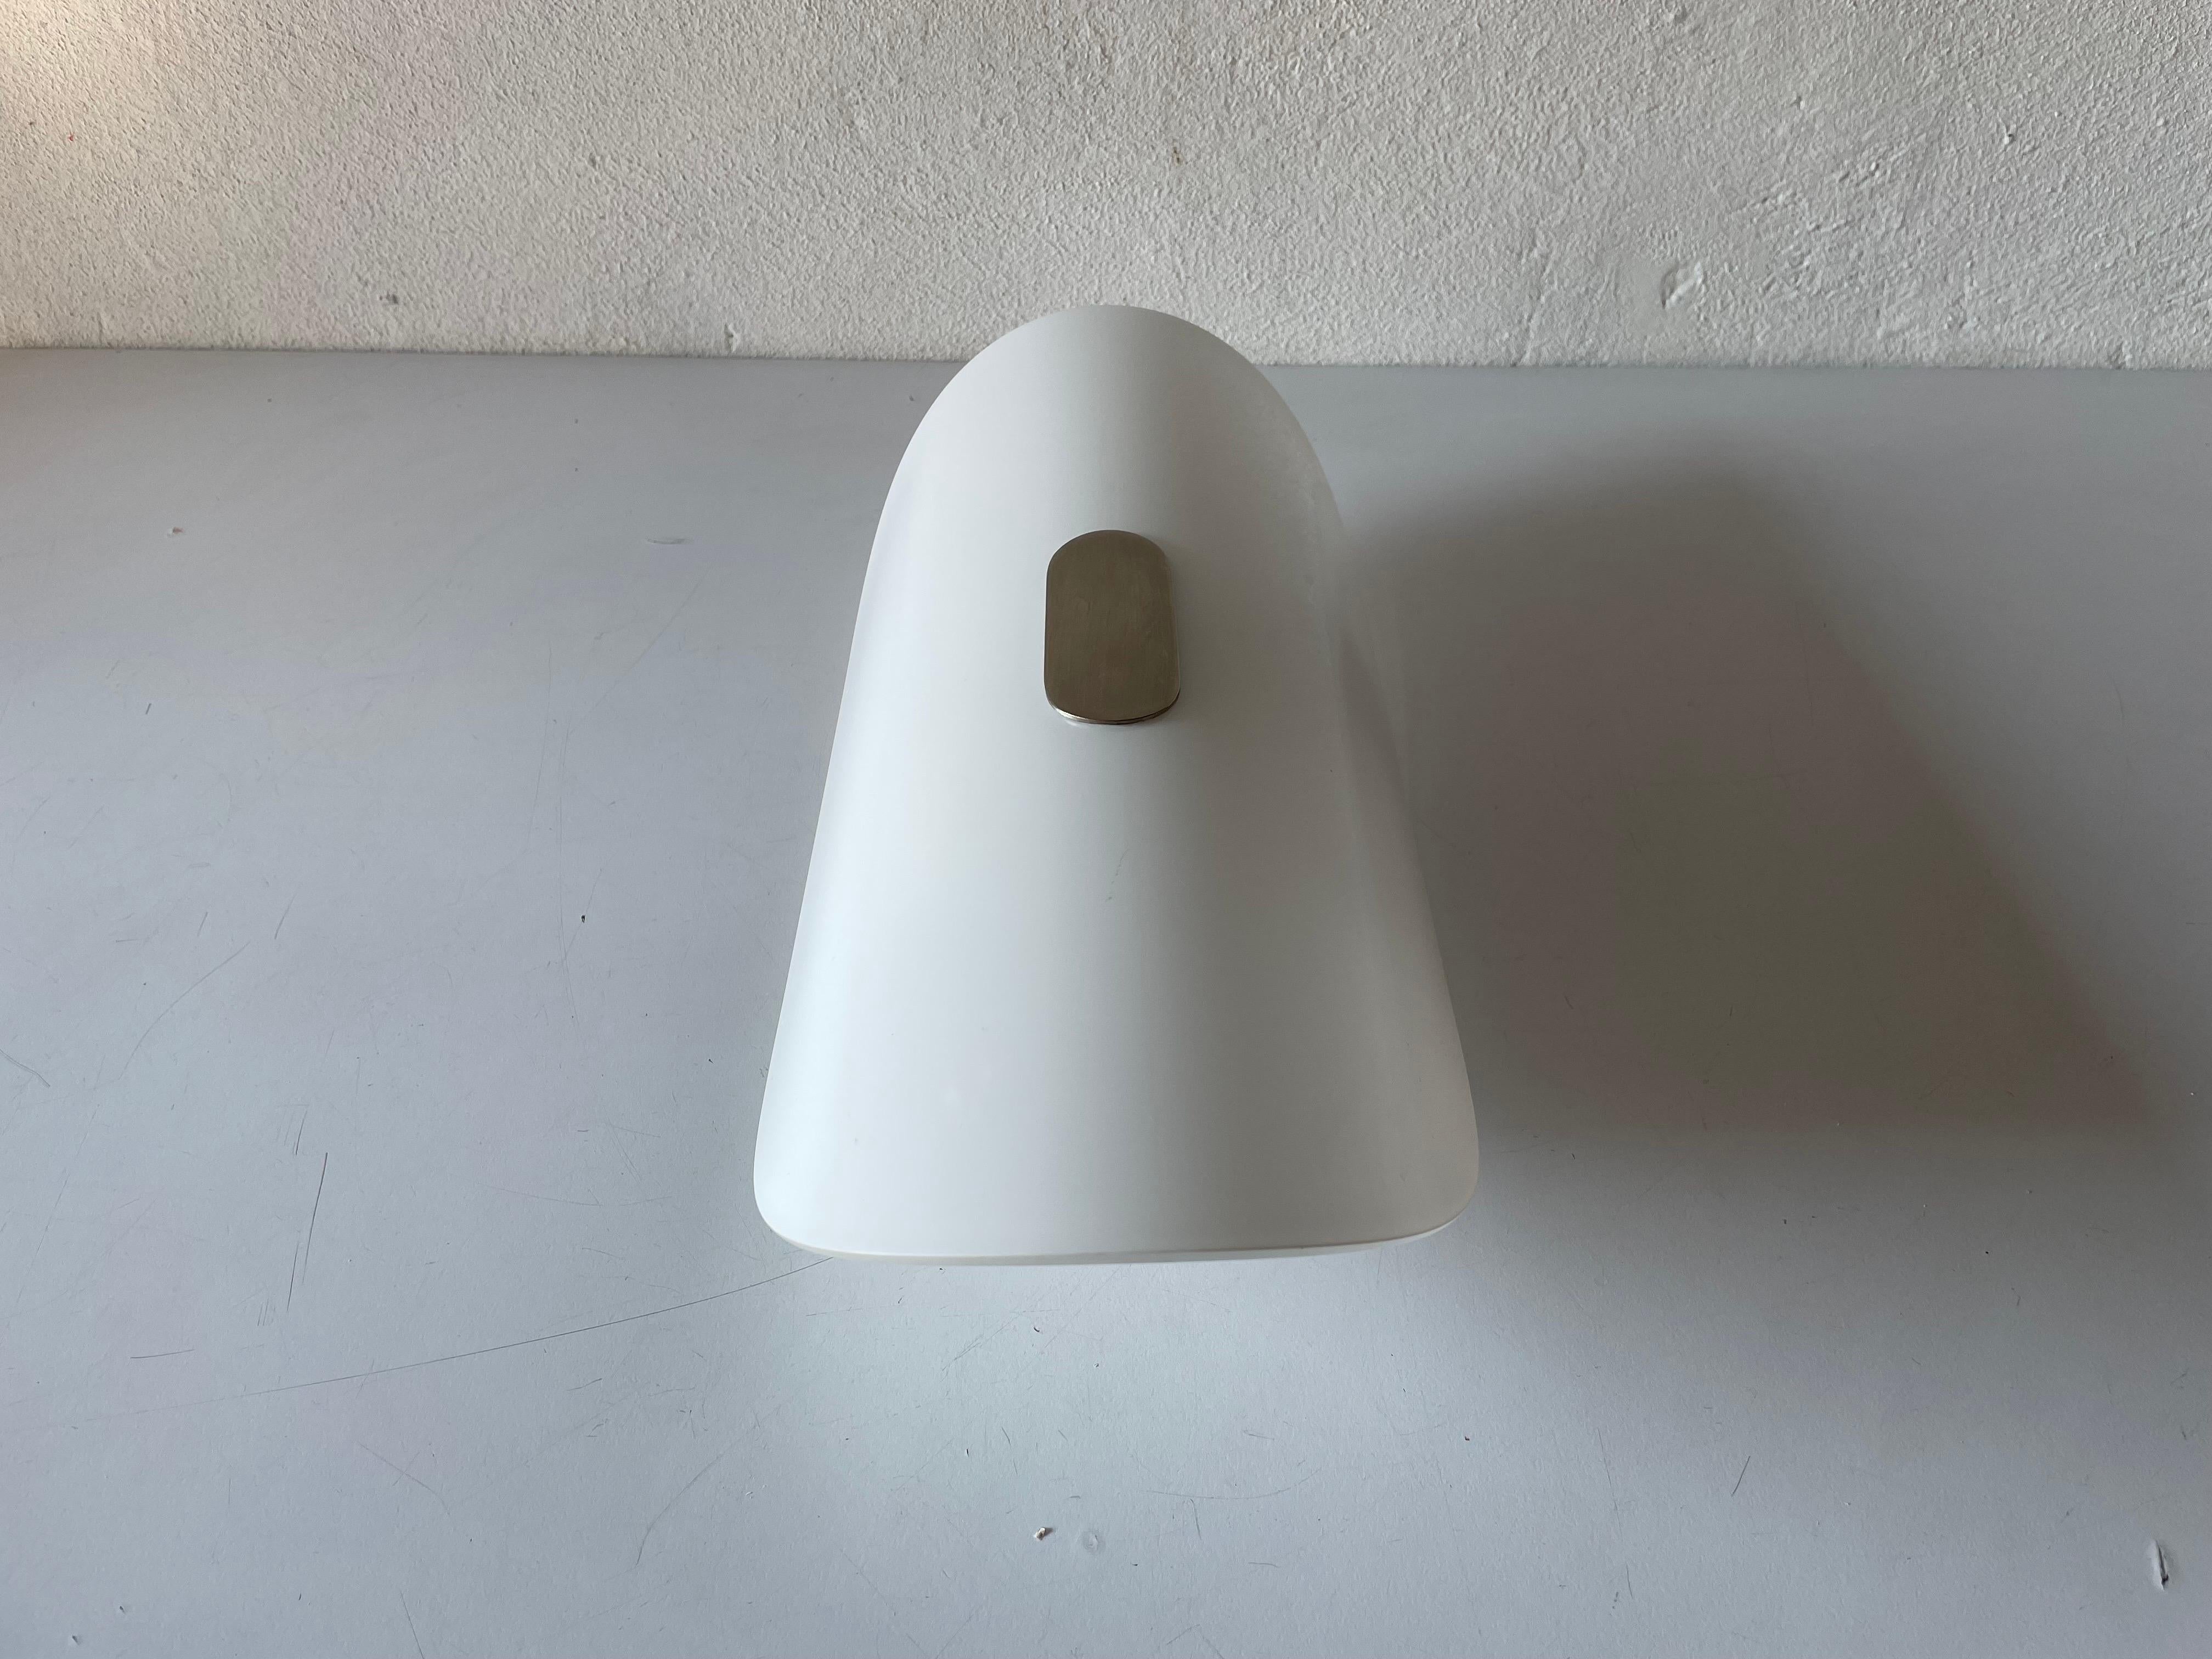 Opal Glass 'Model GEA' Large Single Sconce by Florian Schulz, 1980s Germany
Very rare wall light
Hollywood regency

Very elegant and Minimalist wall lamp

Lamp is in very good condition.
These lamps works with 2x E27 standard light bulbs.